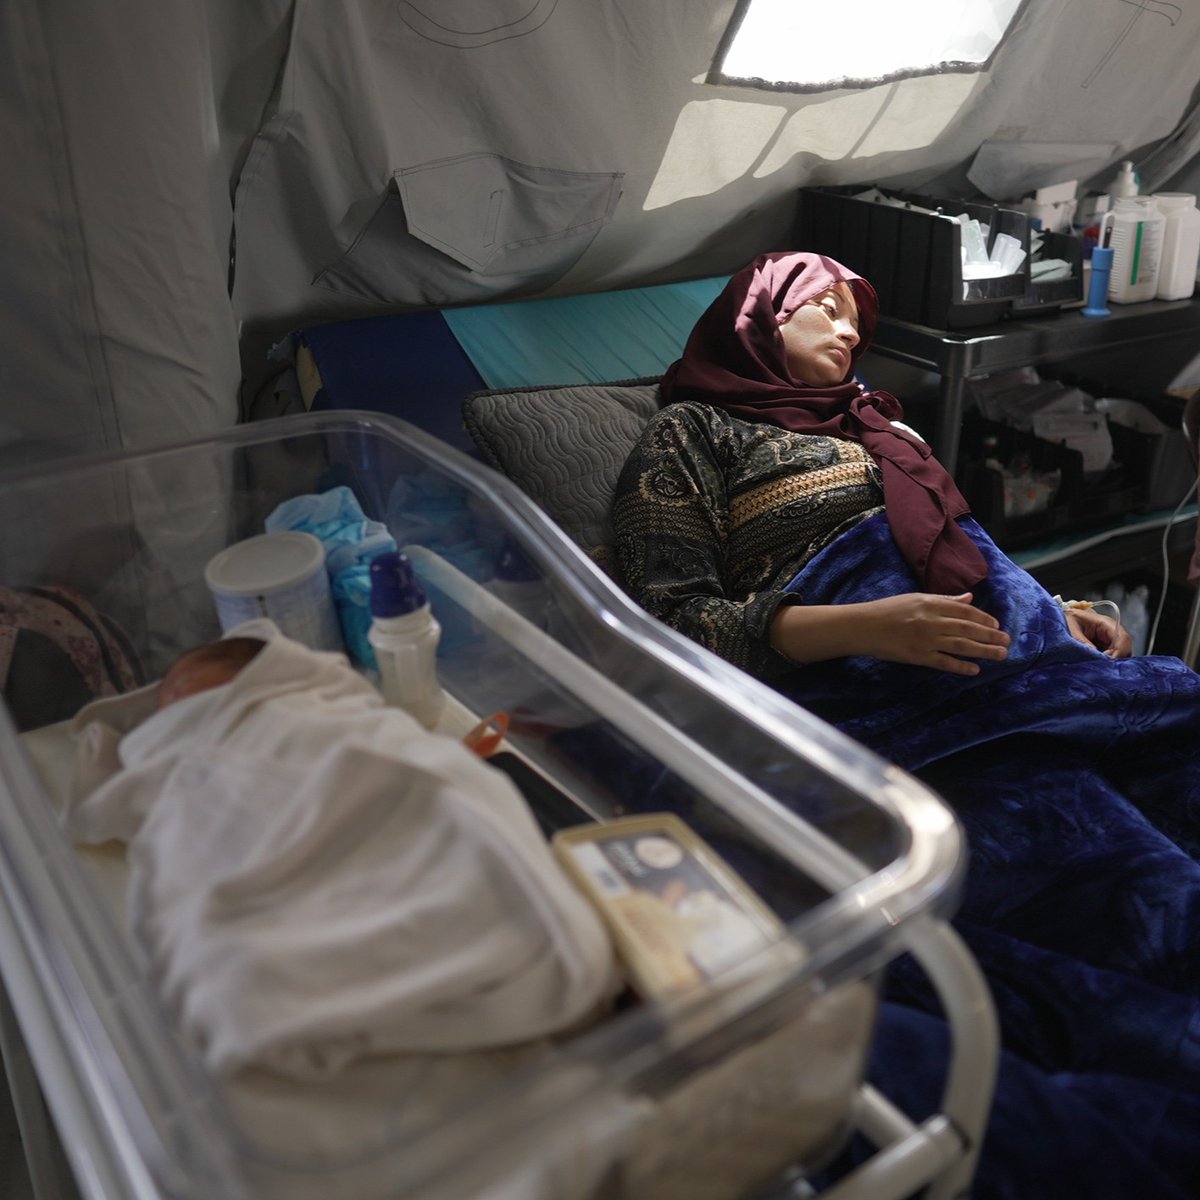 Hungry, exhausted and traumatized. No water, sanitation or health care. This is the reality for an estimated 10,000 pregnant women forced to flee from #Rafah in recent days. See how @UNFPA—the @UN sexual and reproductive health agency—is taking action: unf.pa/opt